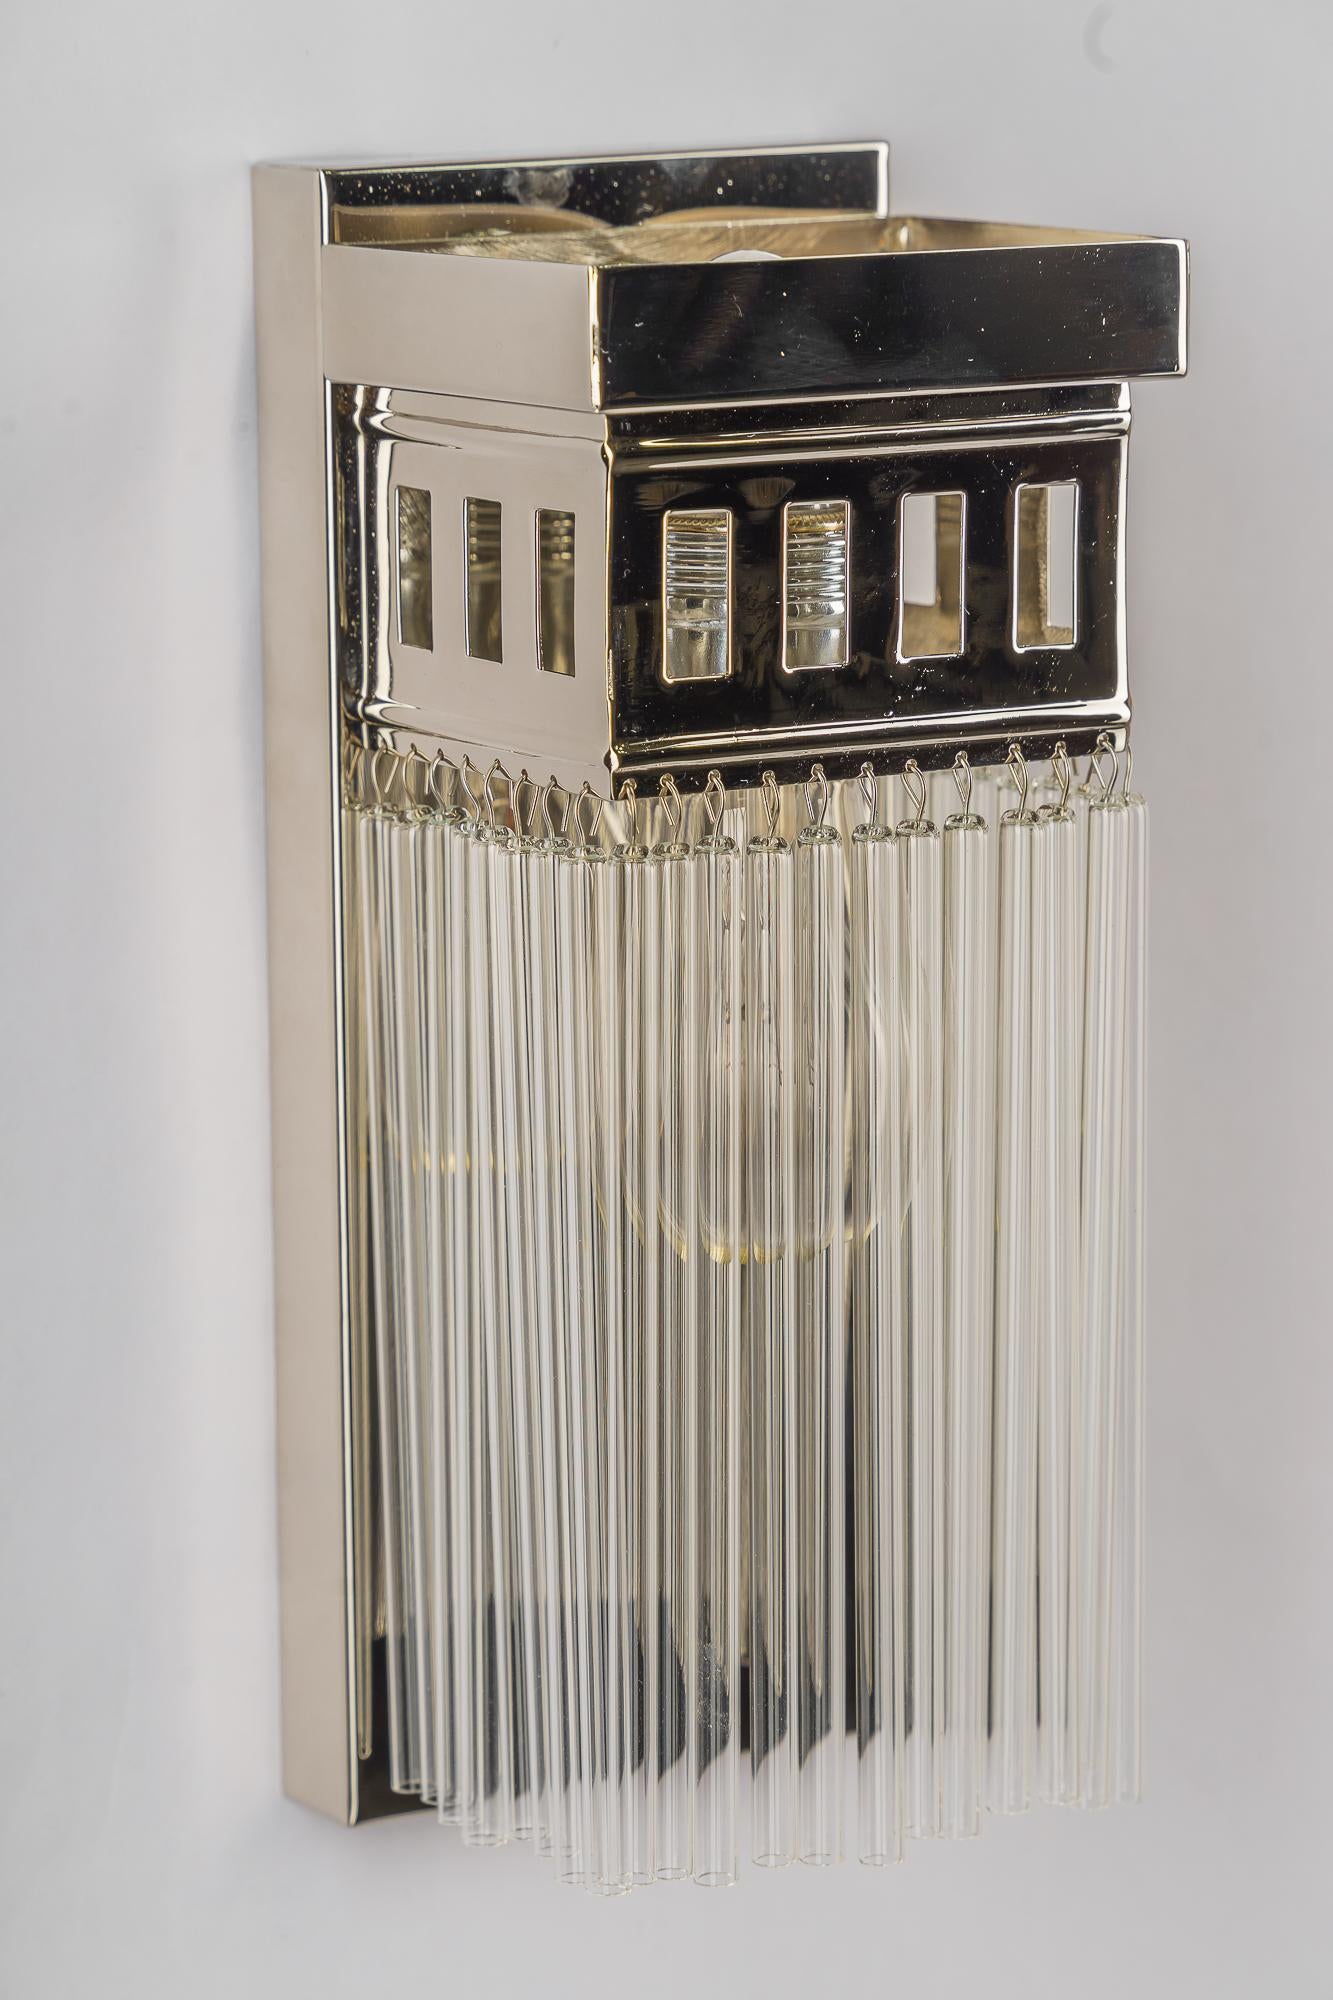 Art Deco Reproduction of a nickel - plated art deco wall lamp with glass sticks For Sale